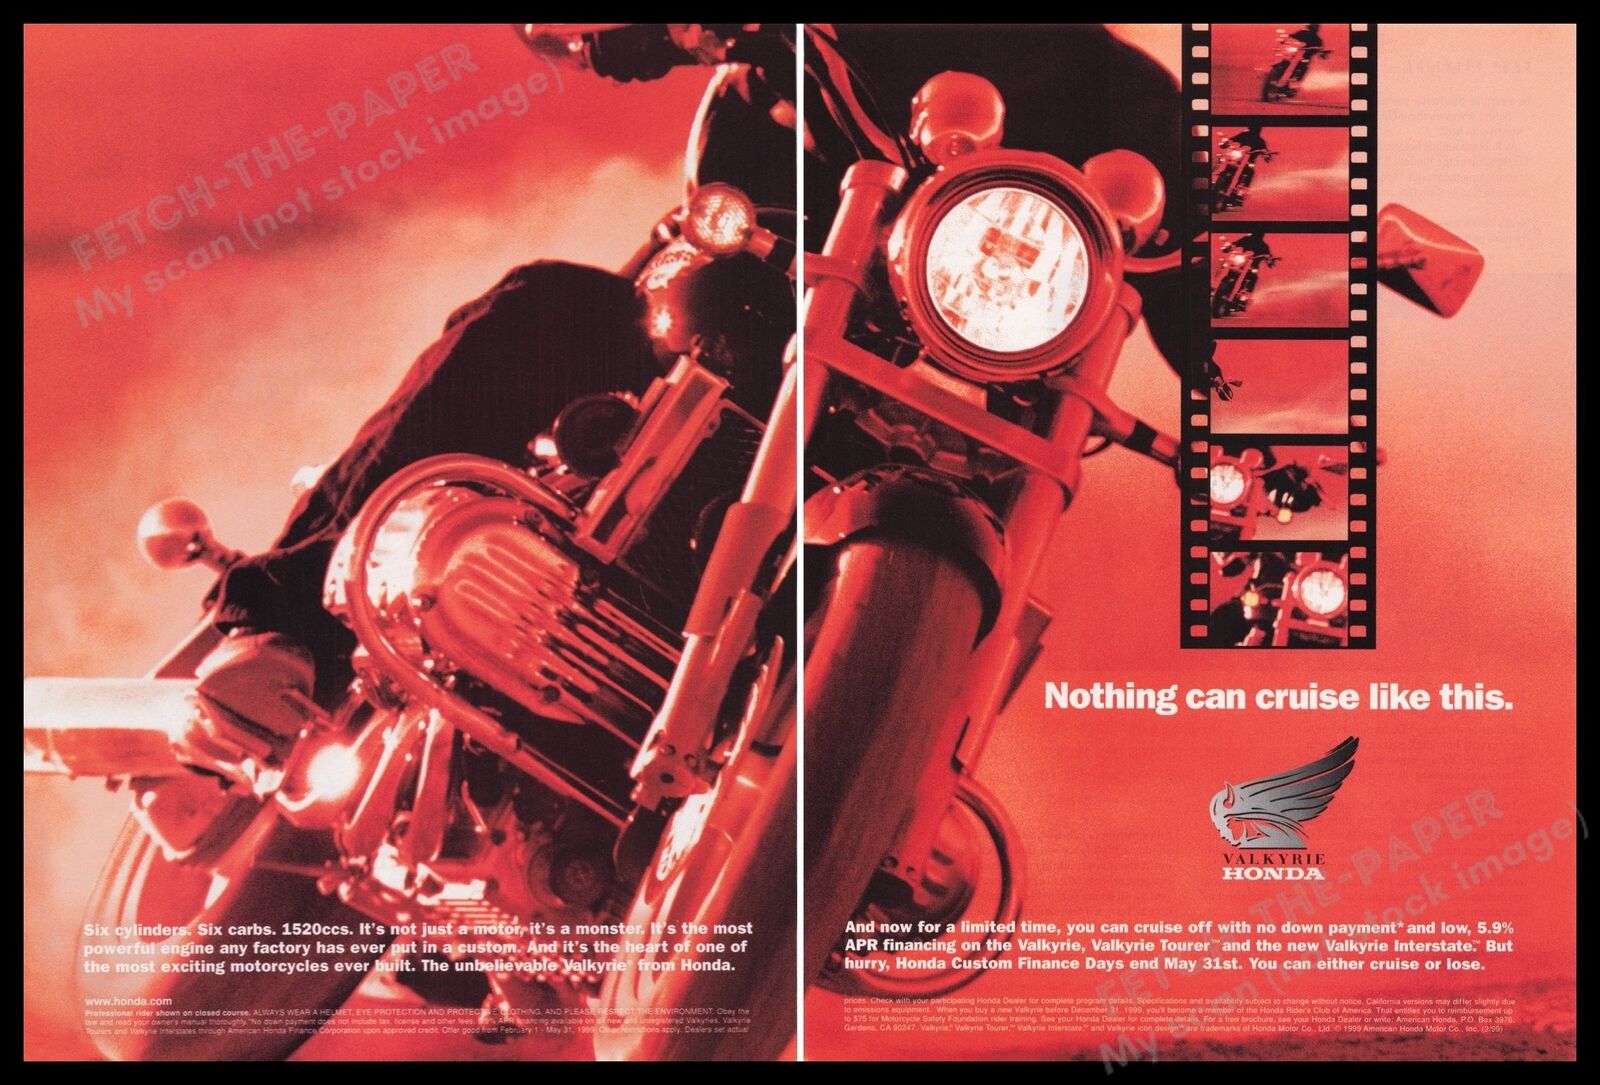 Honda Valkyrie 1990s Print Advertisement (2 pages) 1999